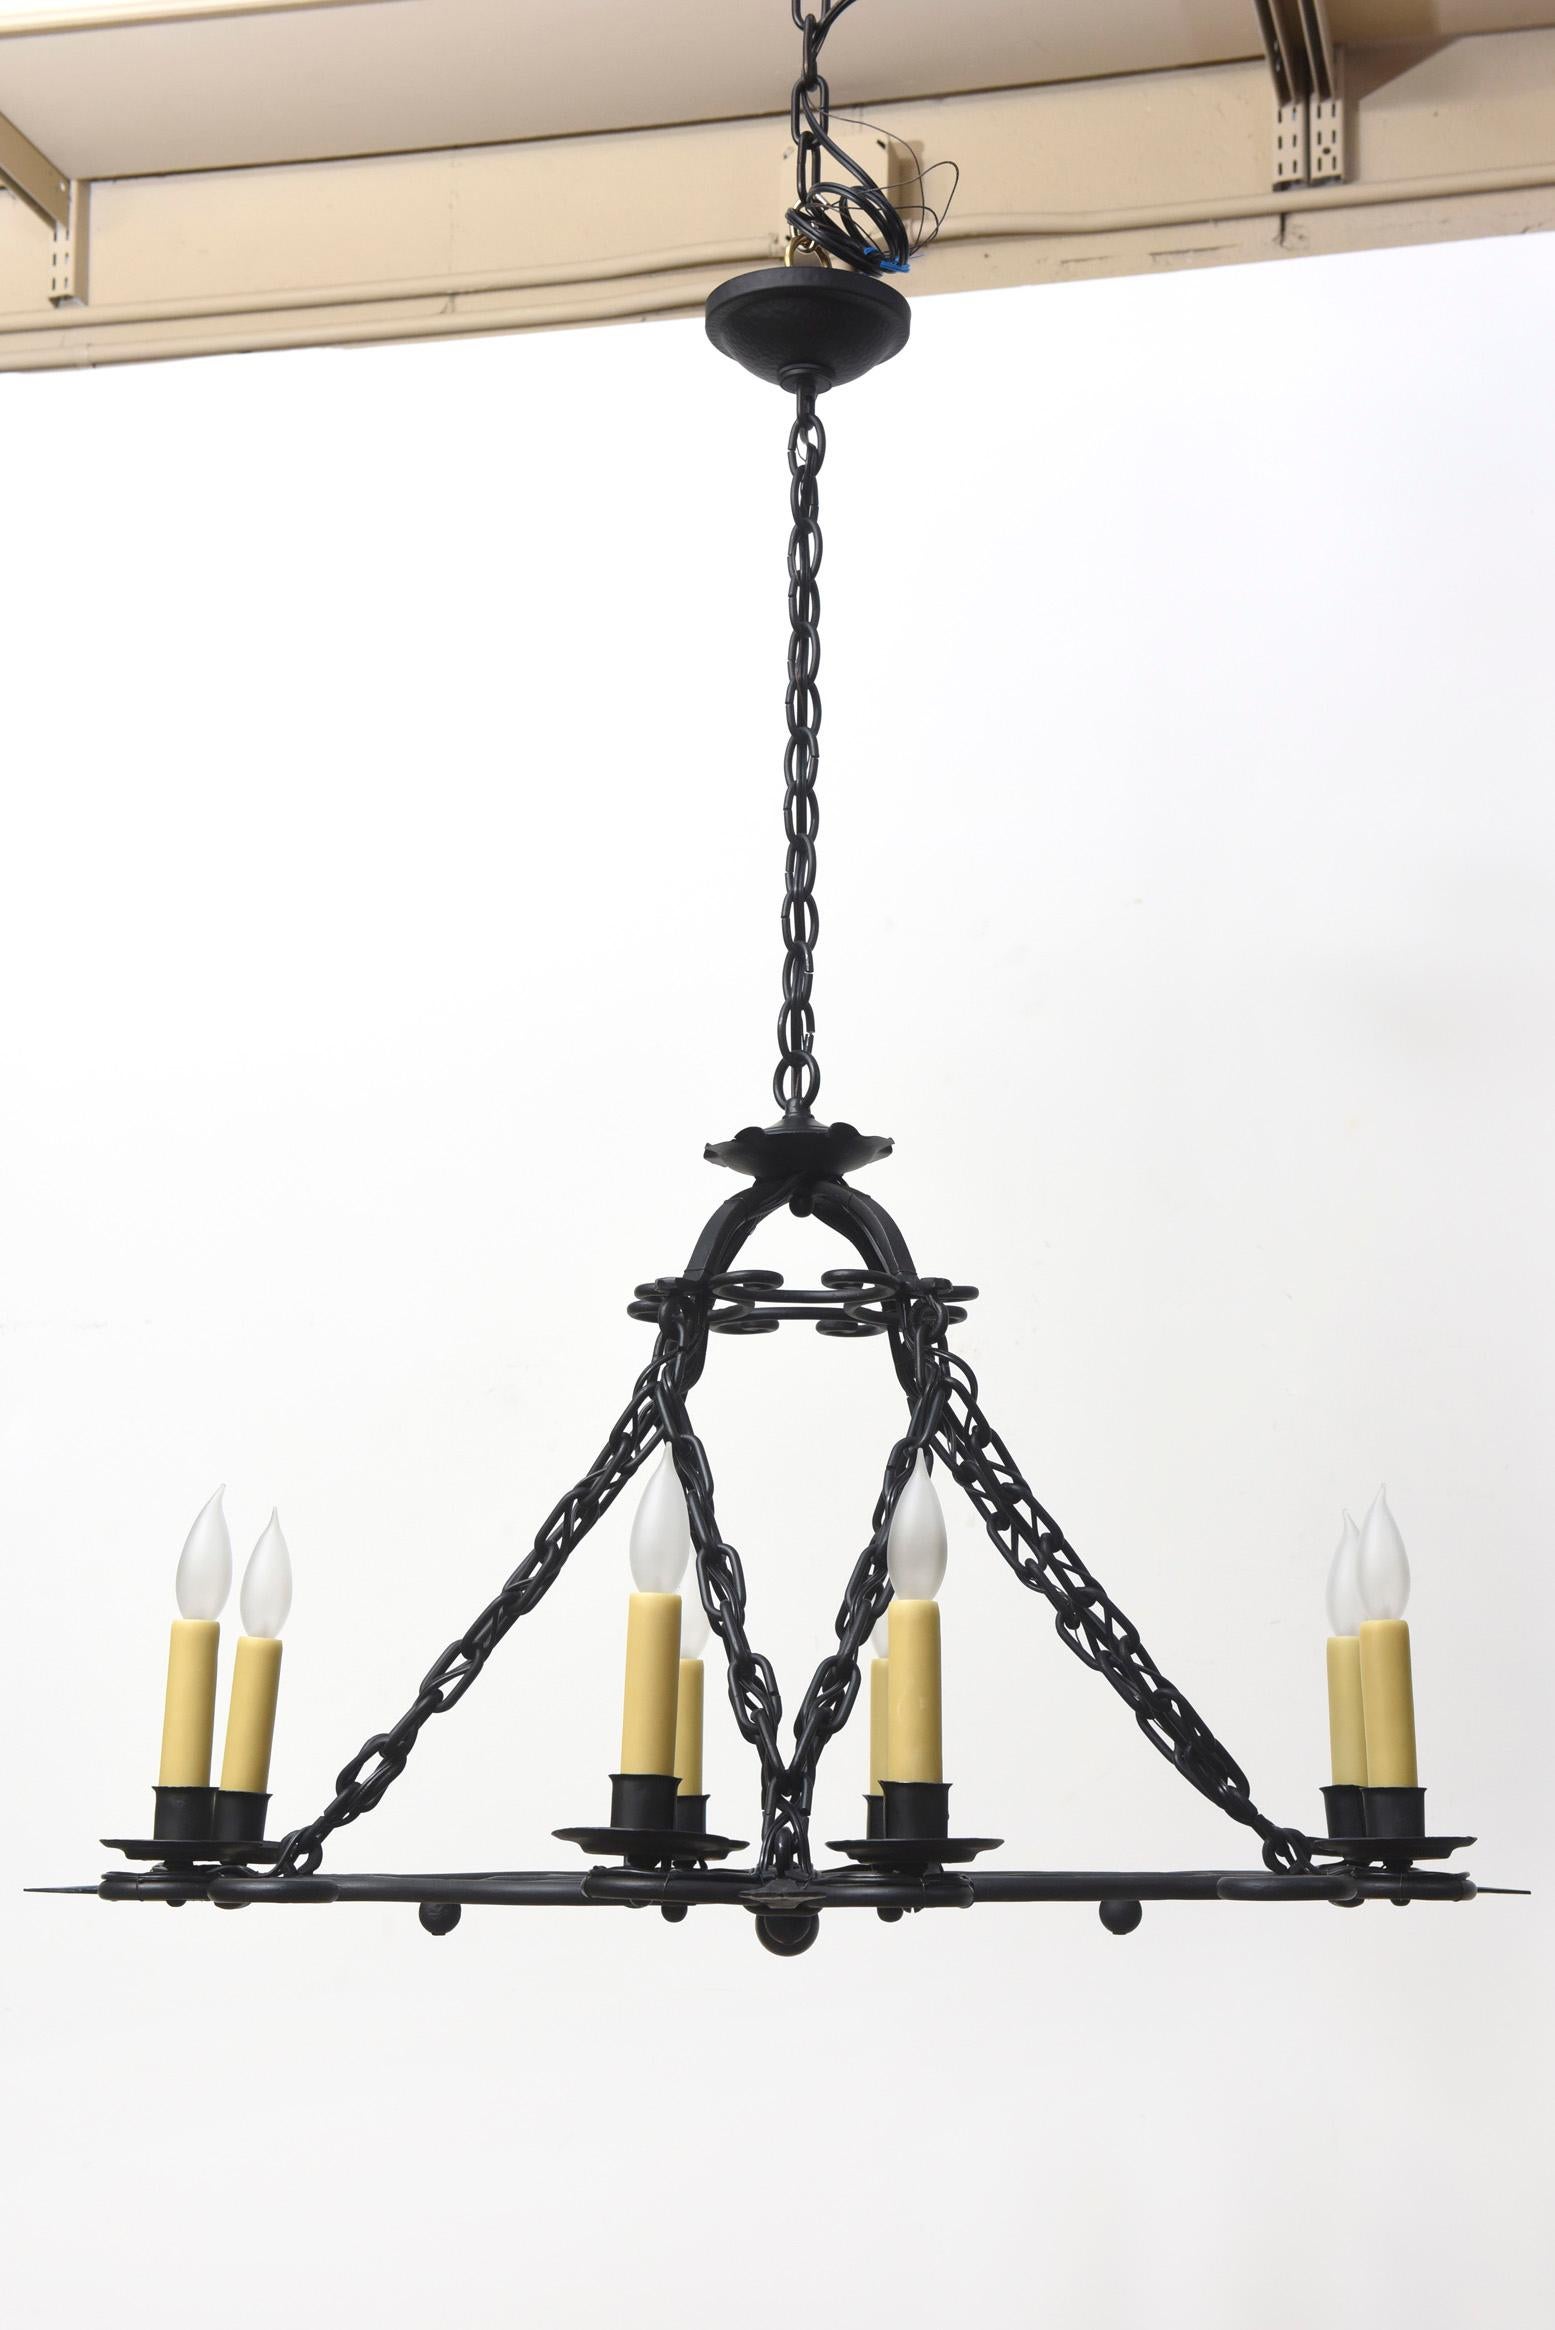 20th Century Wrought Iron Oblong Candle Chandelier For Sale